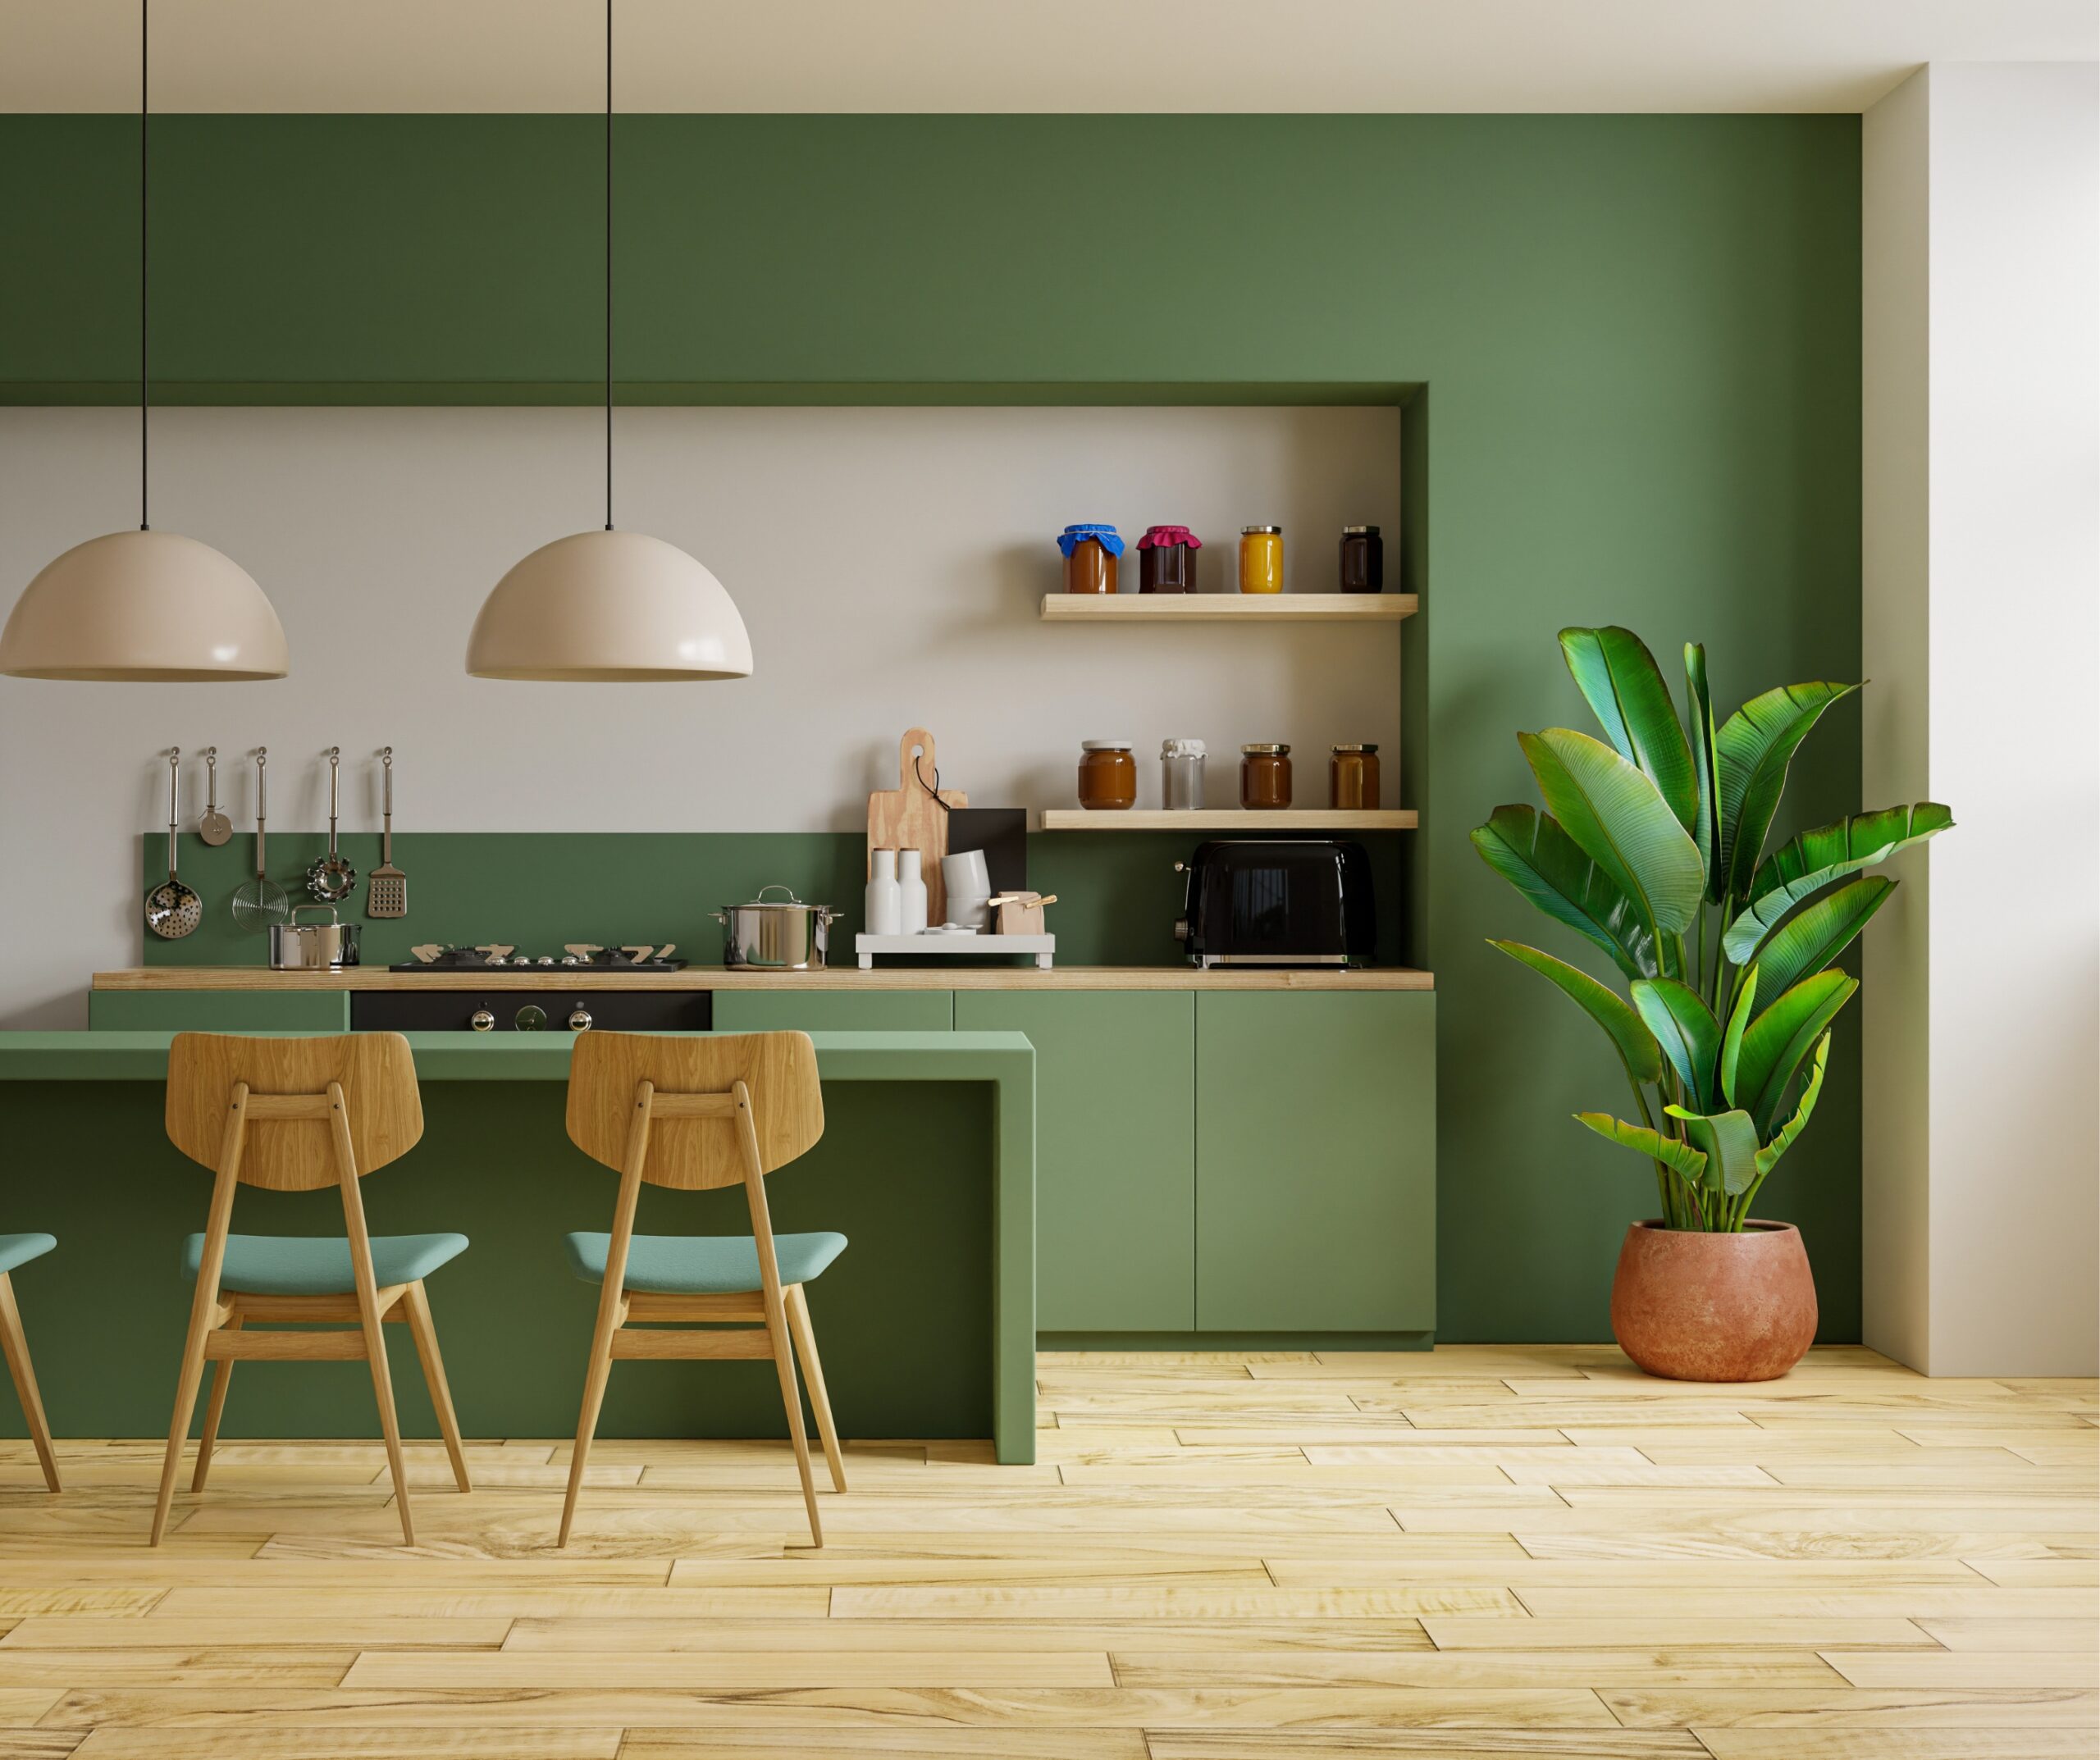 Fern Green Kitchen a trending color for kitchens